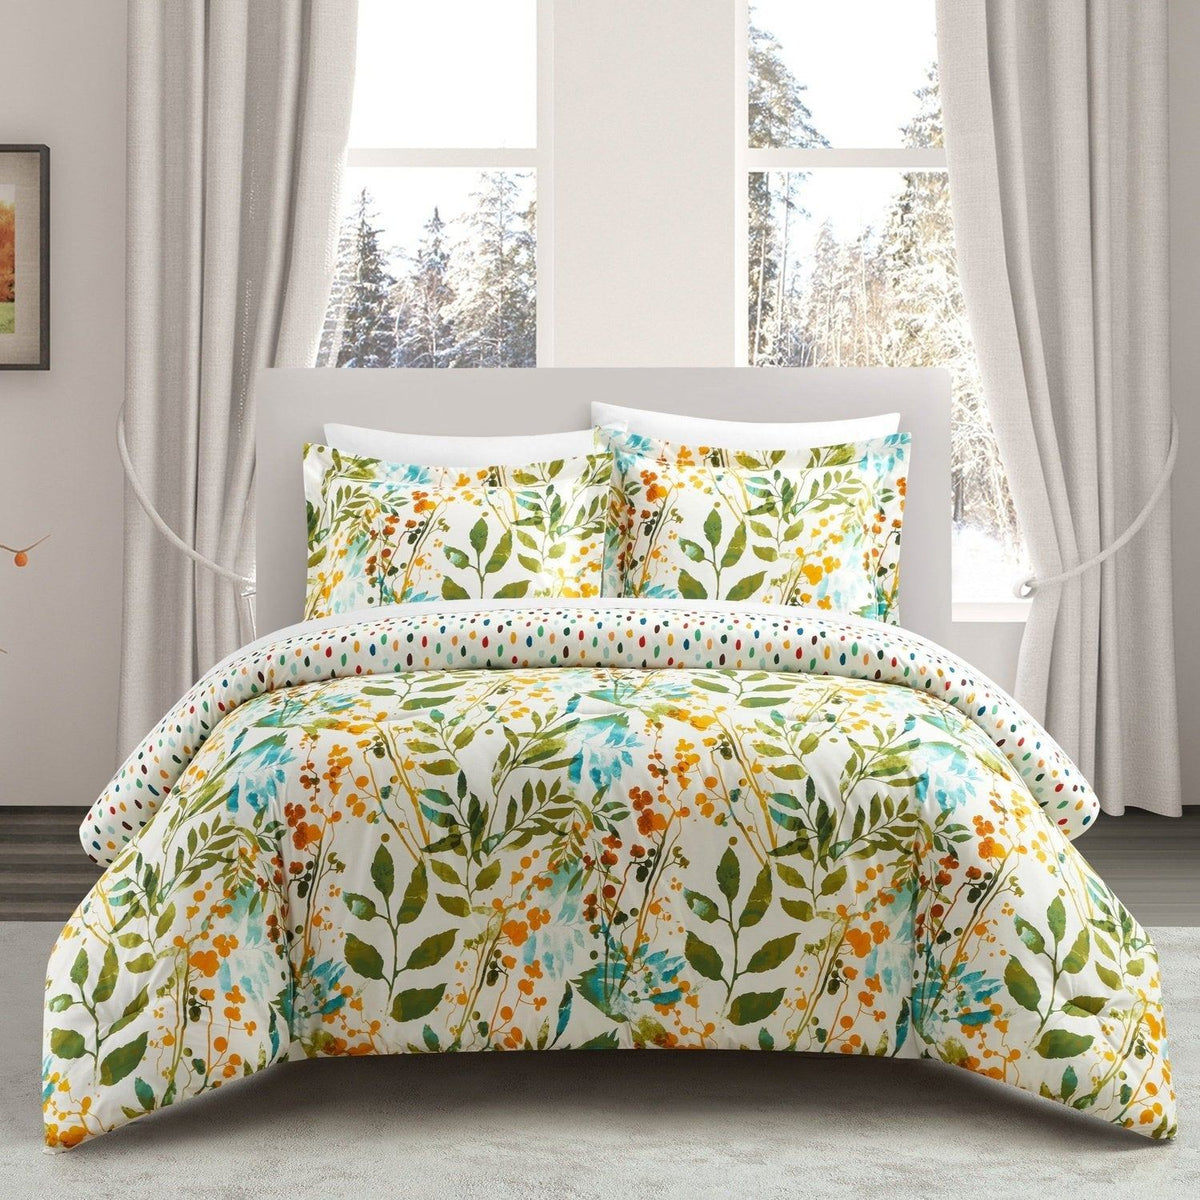 Chic Home Robin 7 Piece Reversible Floral Print Duvet Cover Set Twin